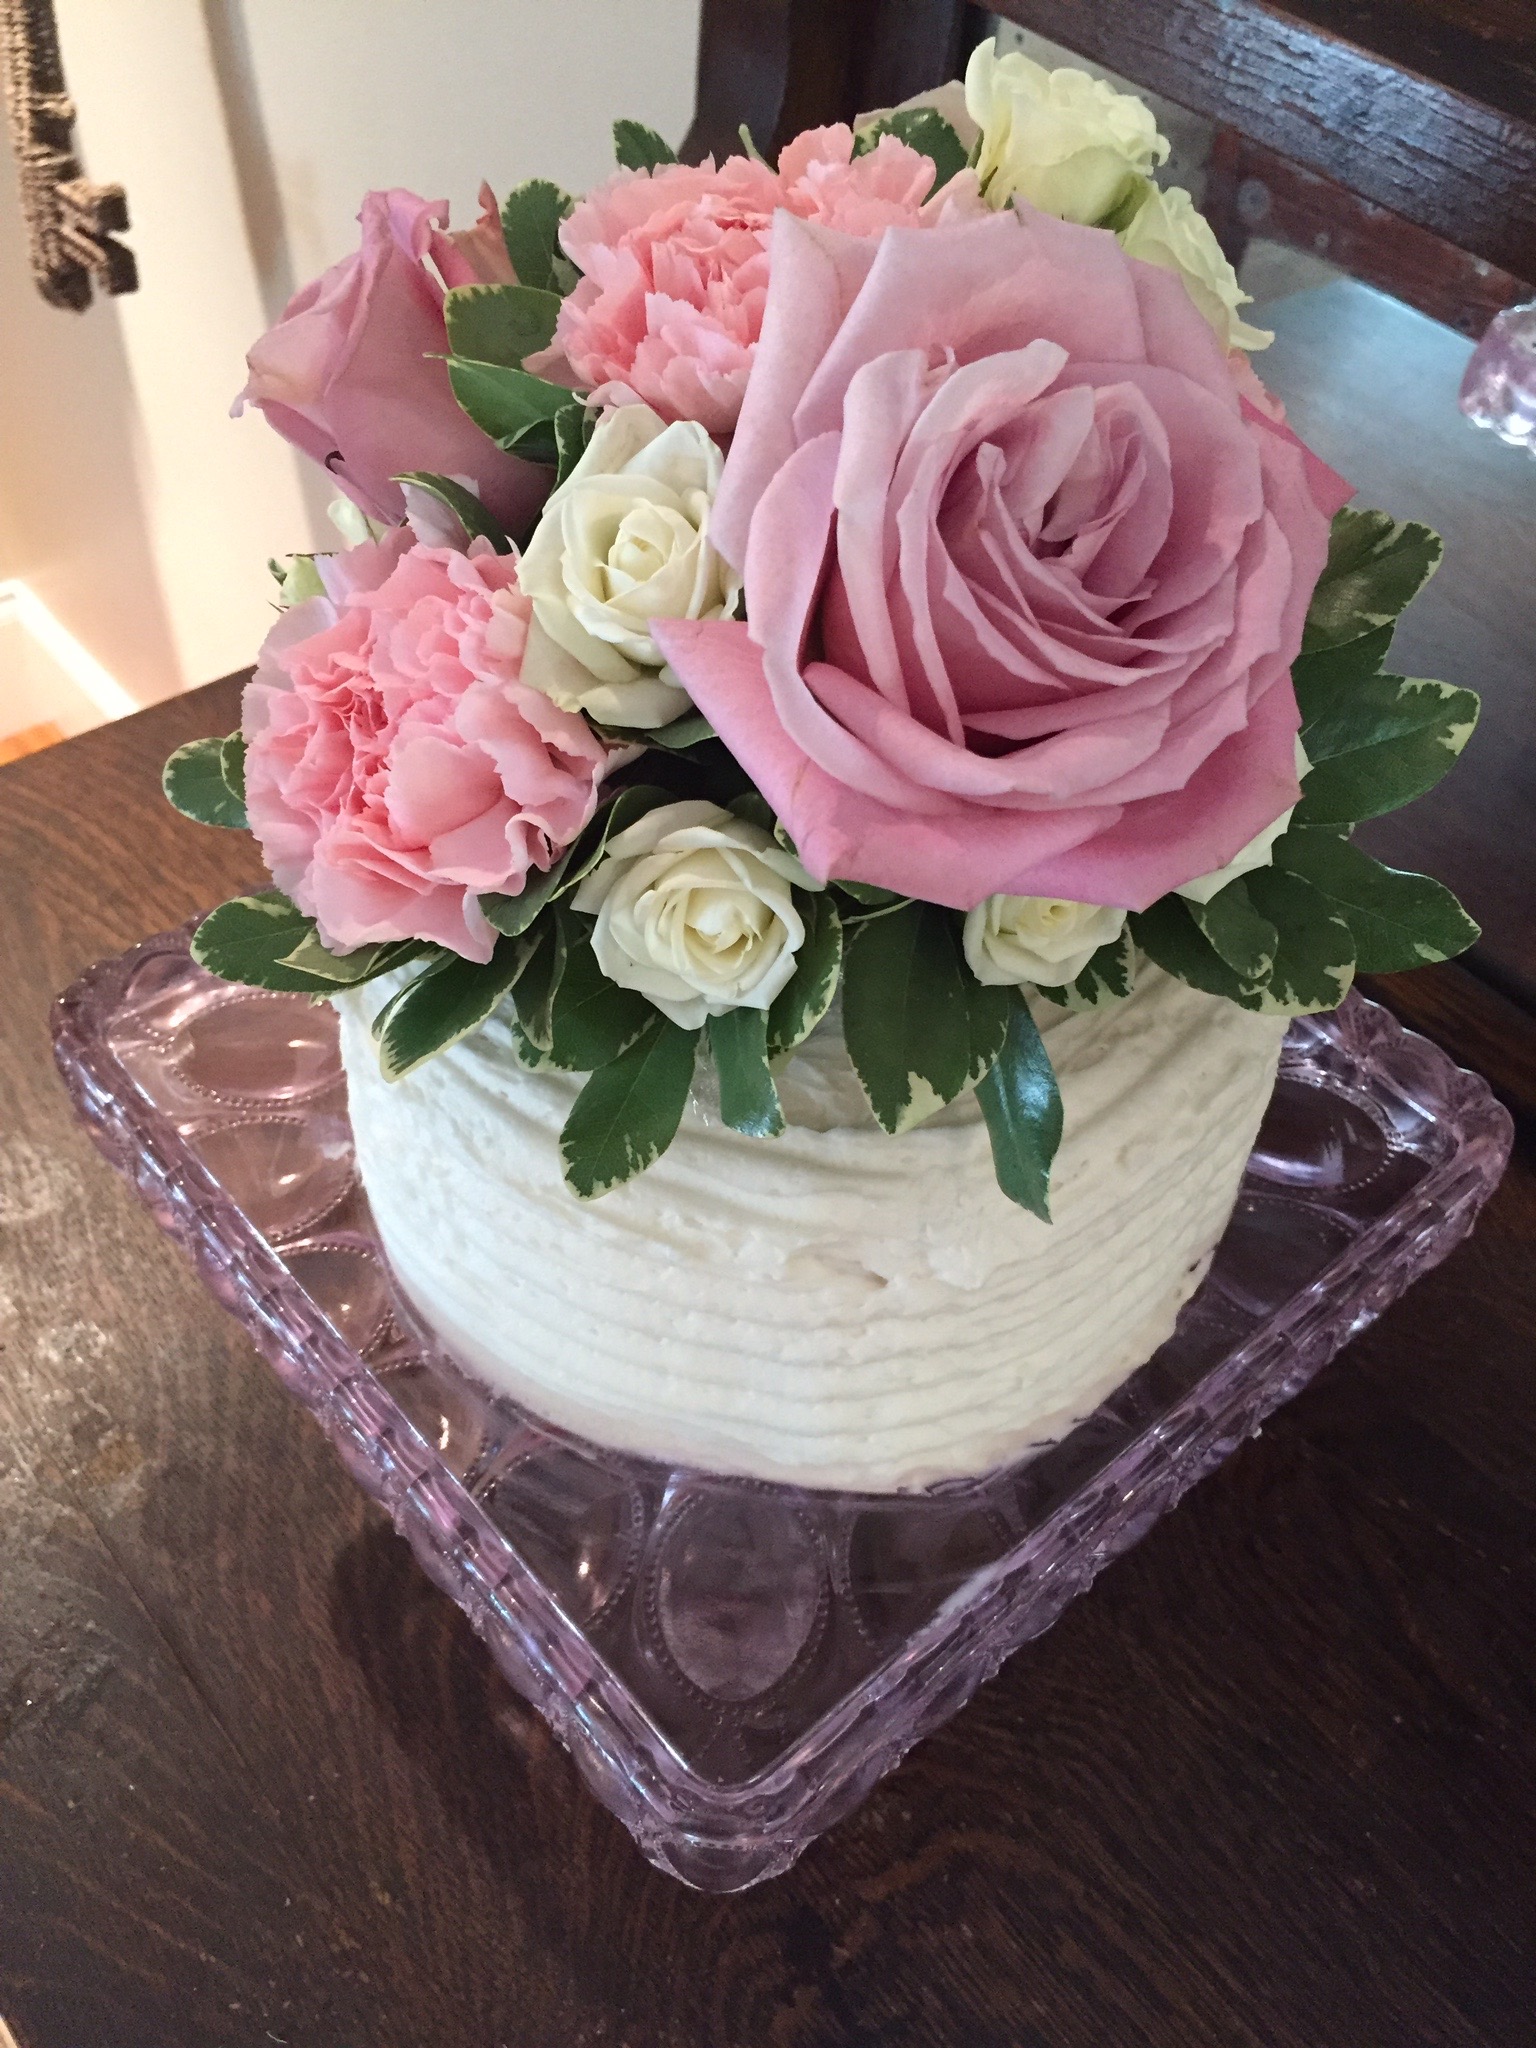 Bridal Shower Cake Ideas | Use fresh flowers to decorate cake | Buttercream frosting